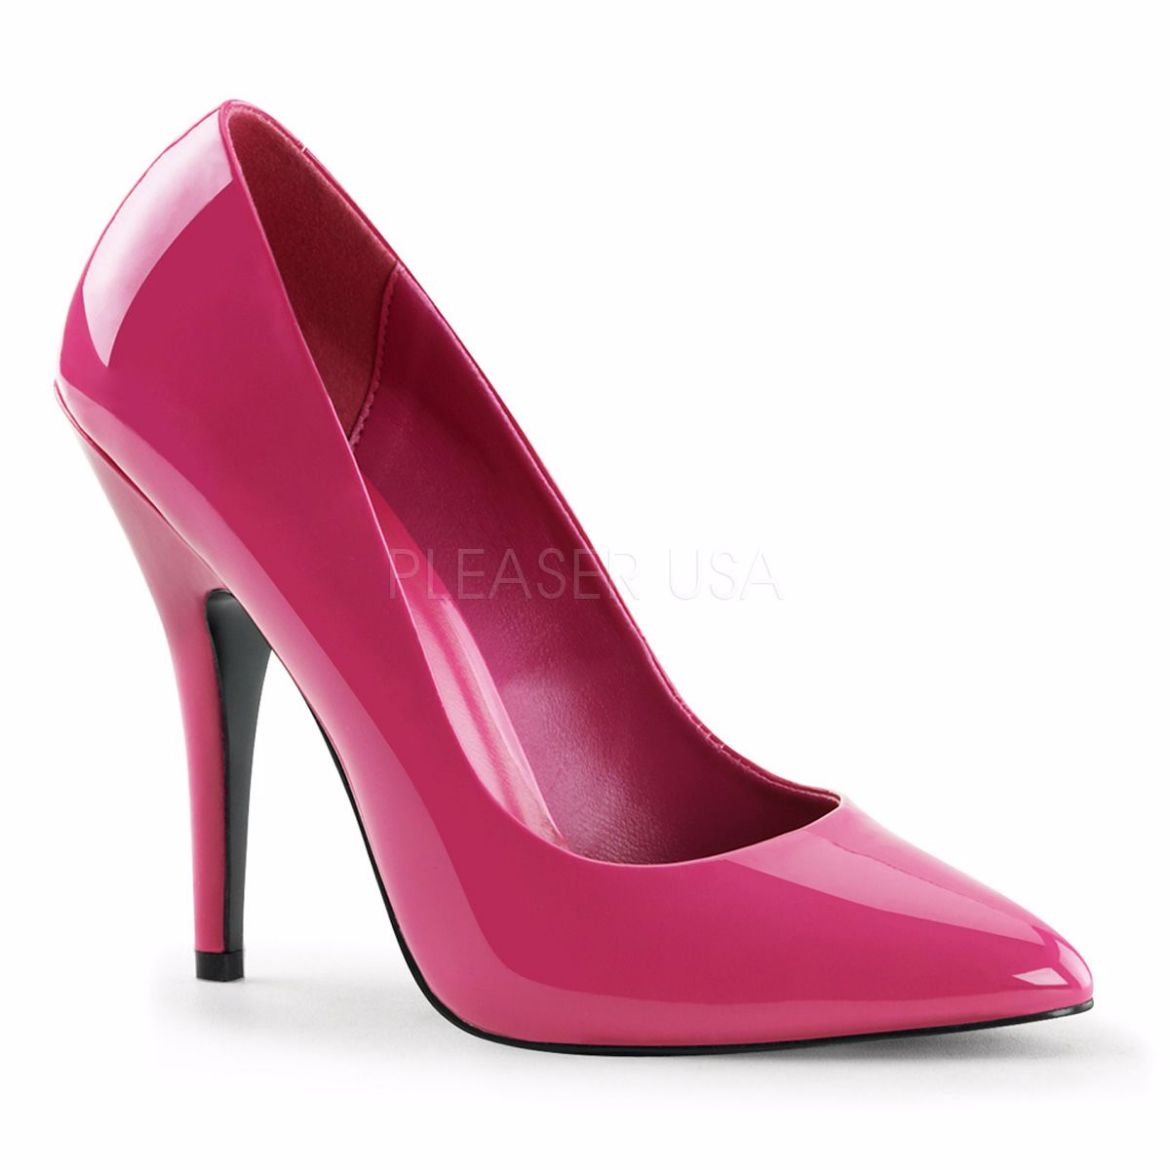 Product image of Pleaser Seduce-420 Hot Pink Patent, 5 inch (12.7 cm) Heel Court Pump Shoes